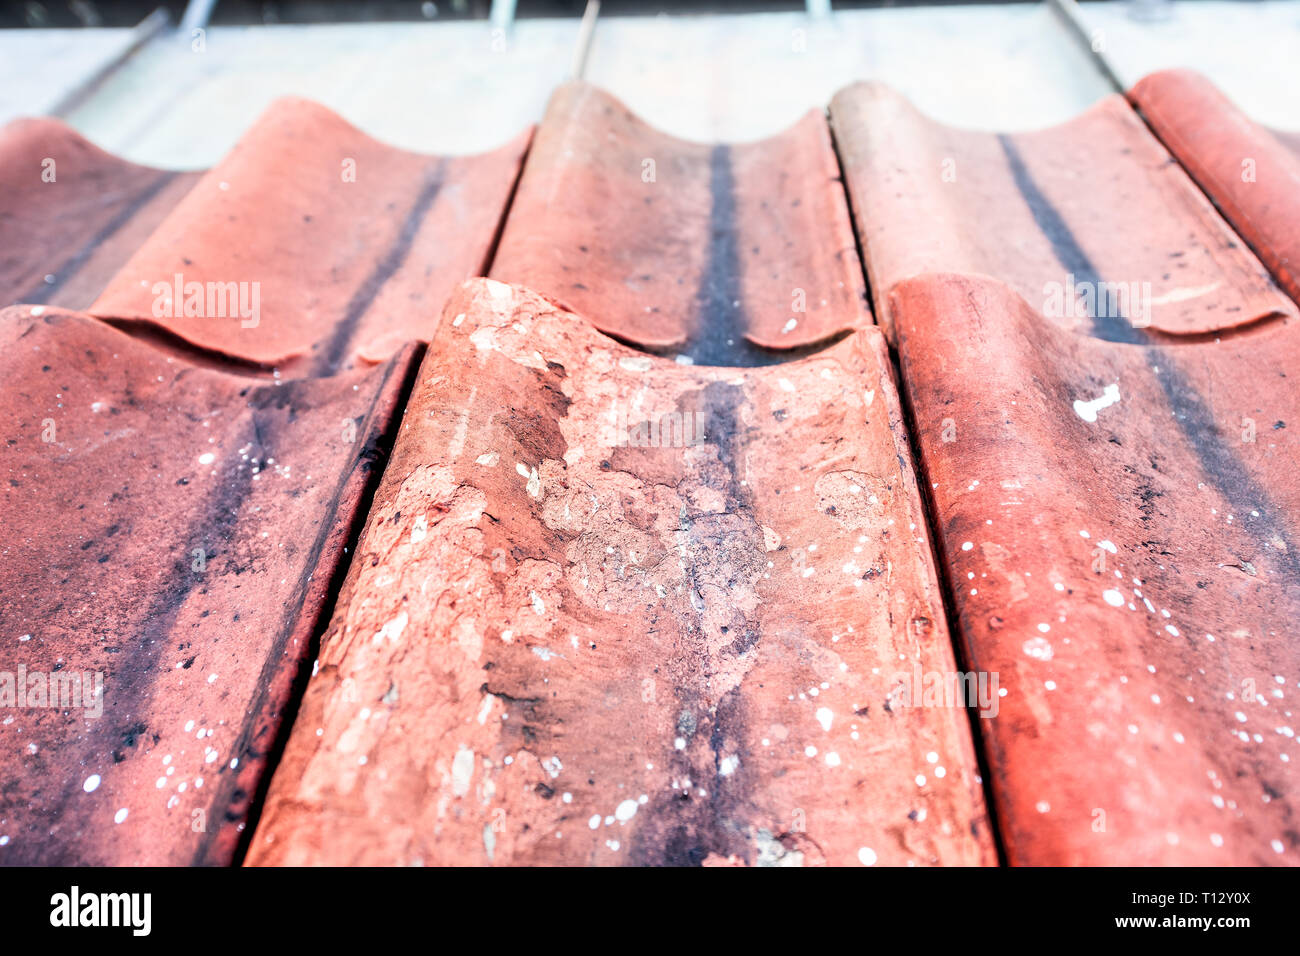 Closeup of red roof tiles in Warsaw, Poland colorful old historic architecture in old town market square texture Stock Photo